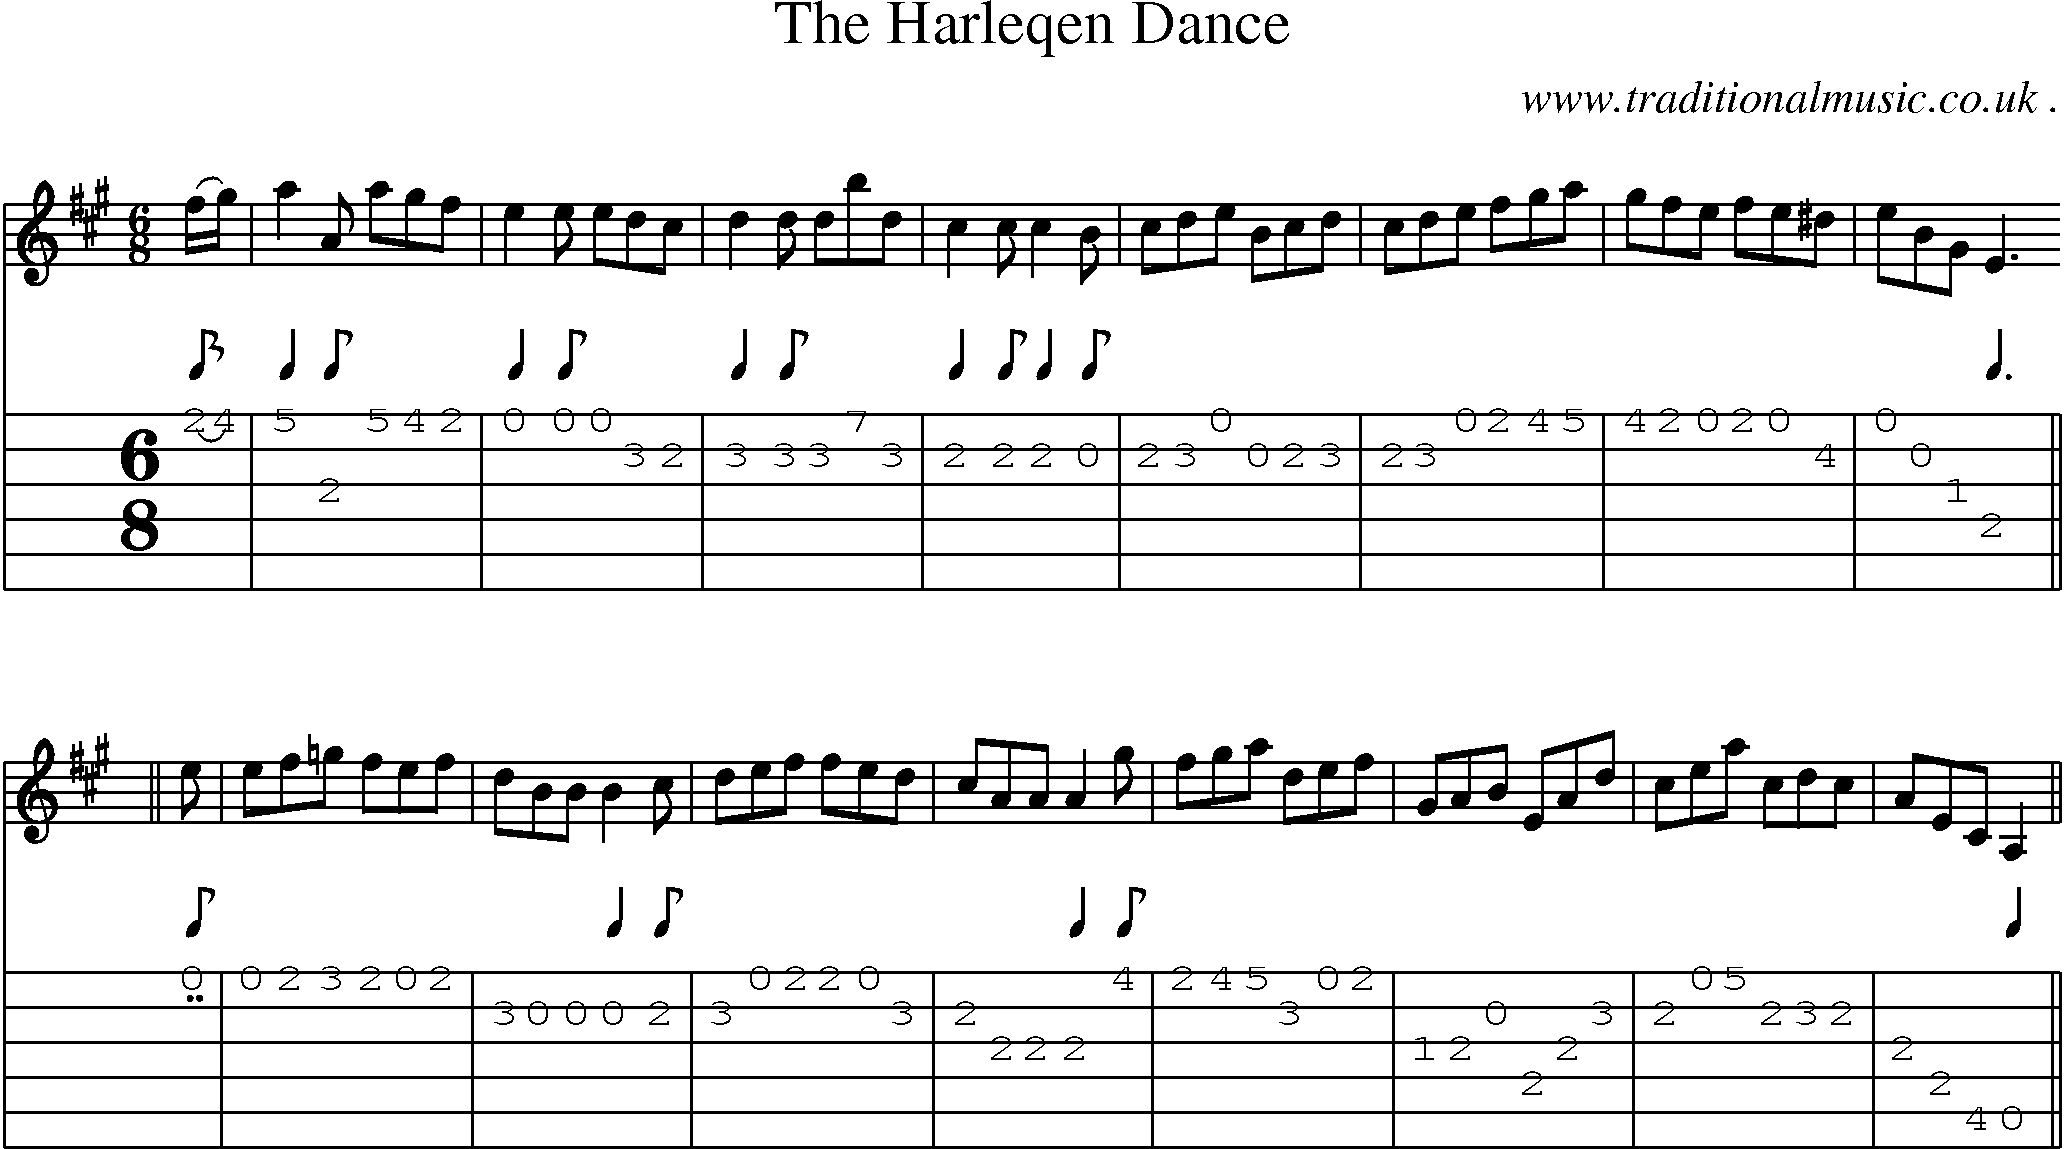 Sheet-Music and Guitar Tabs for The Harleqen Dance